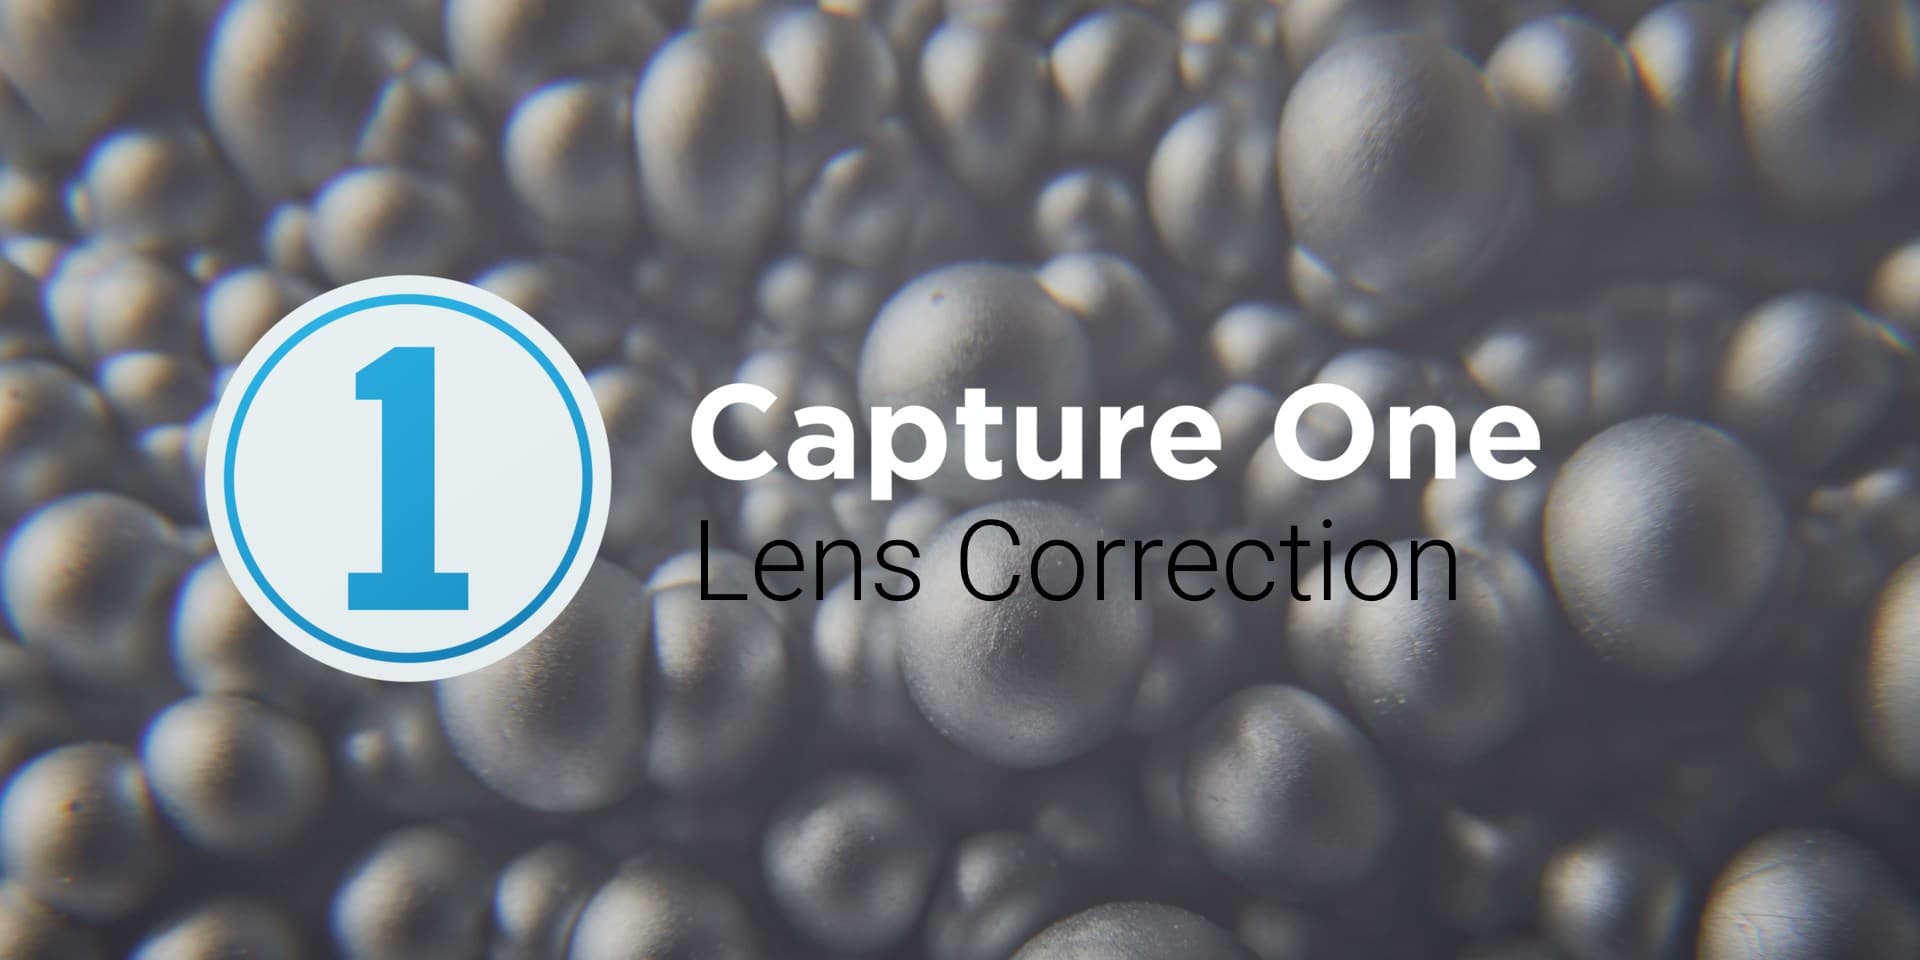 Lens Correction in Capture One